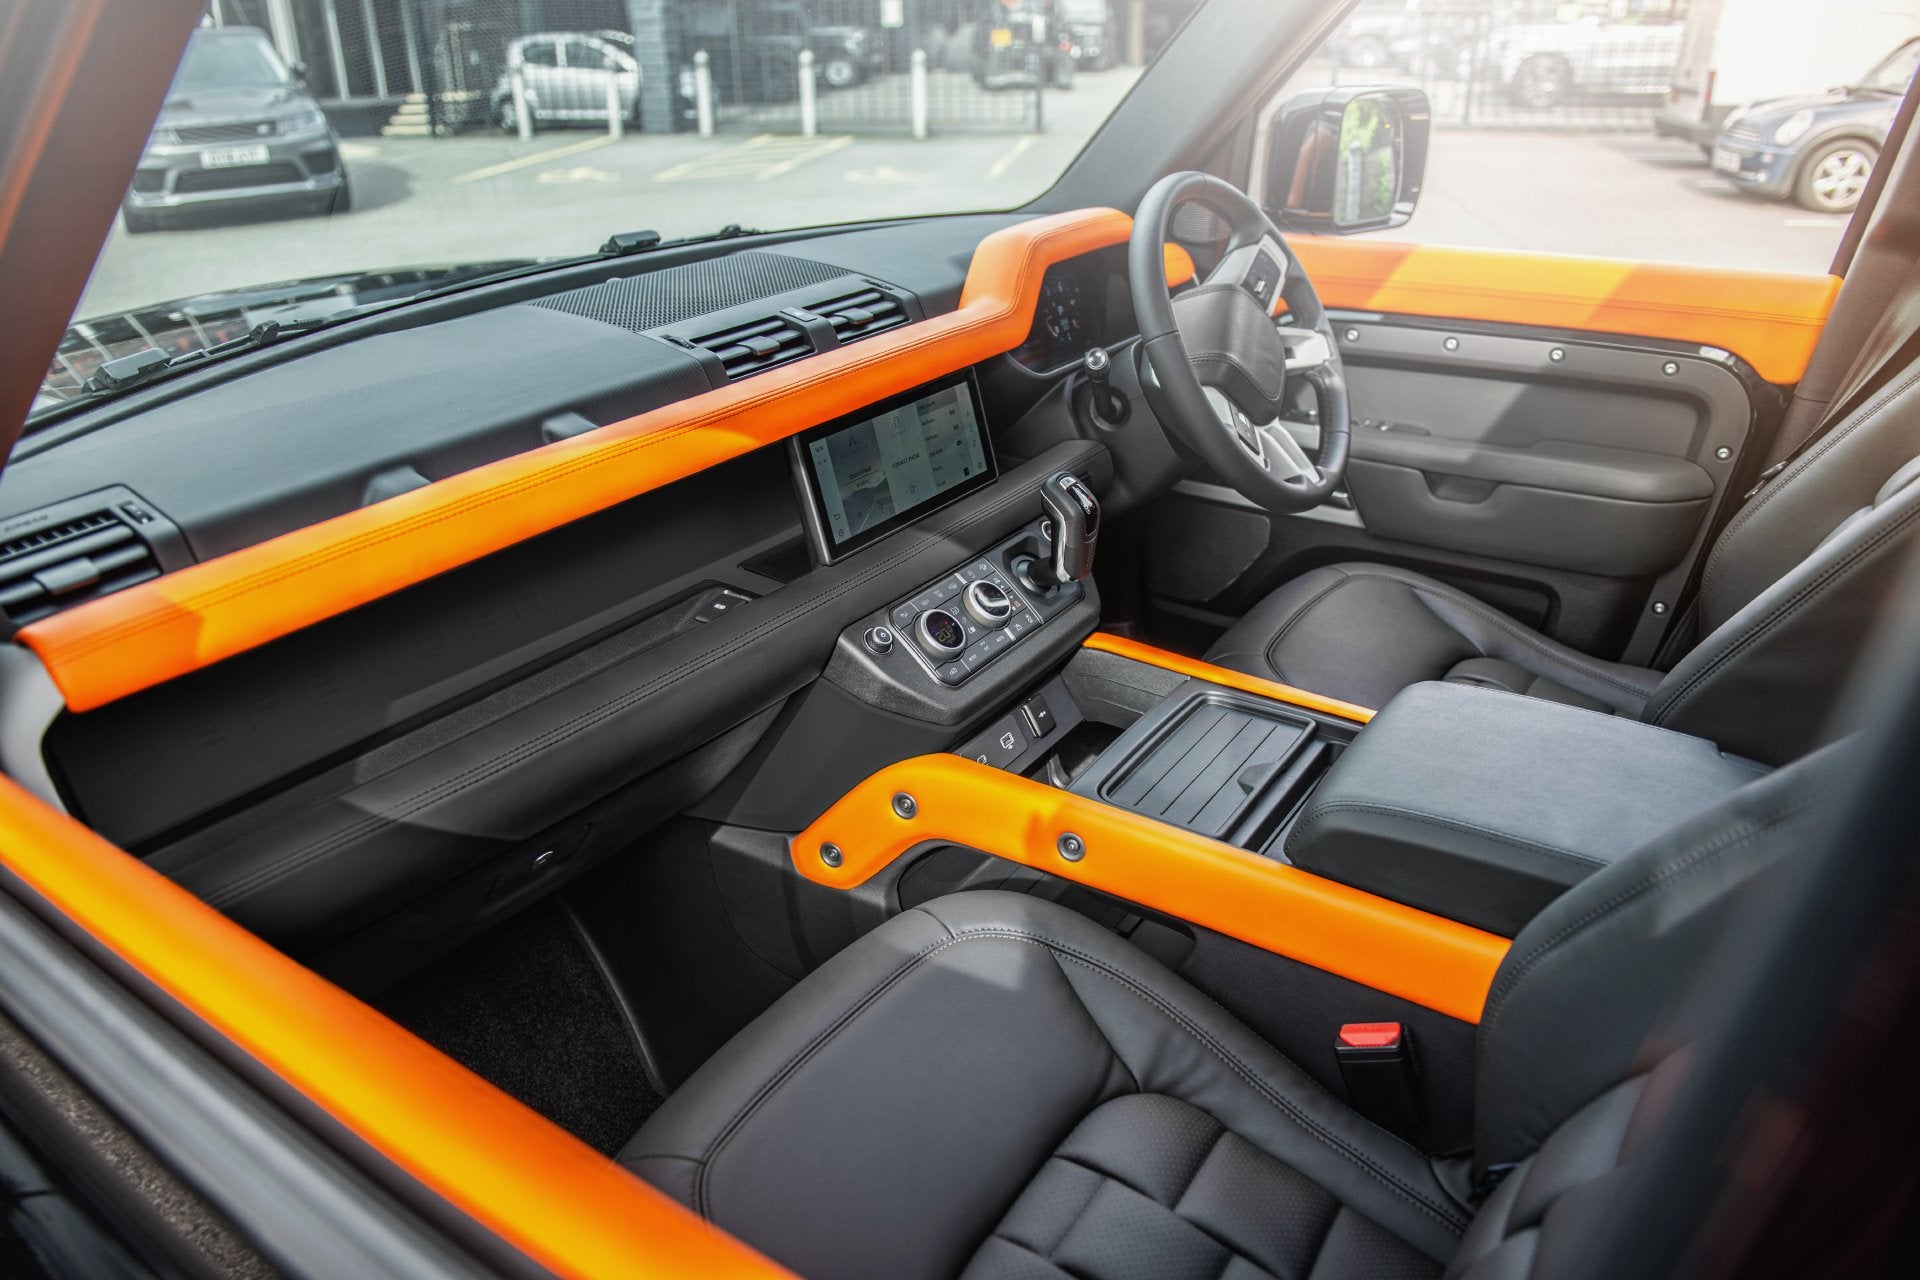 Land Rover Defender 110 (2020-Present) Environment 2: Upper and Lower Interior